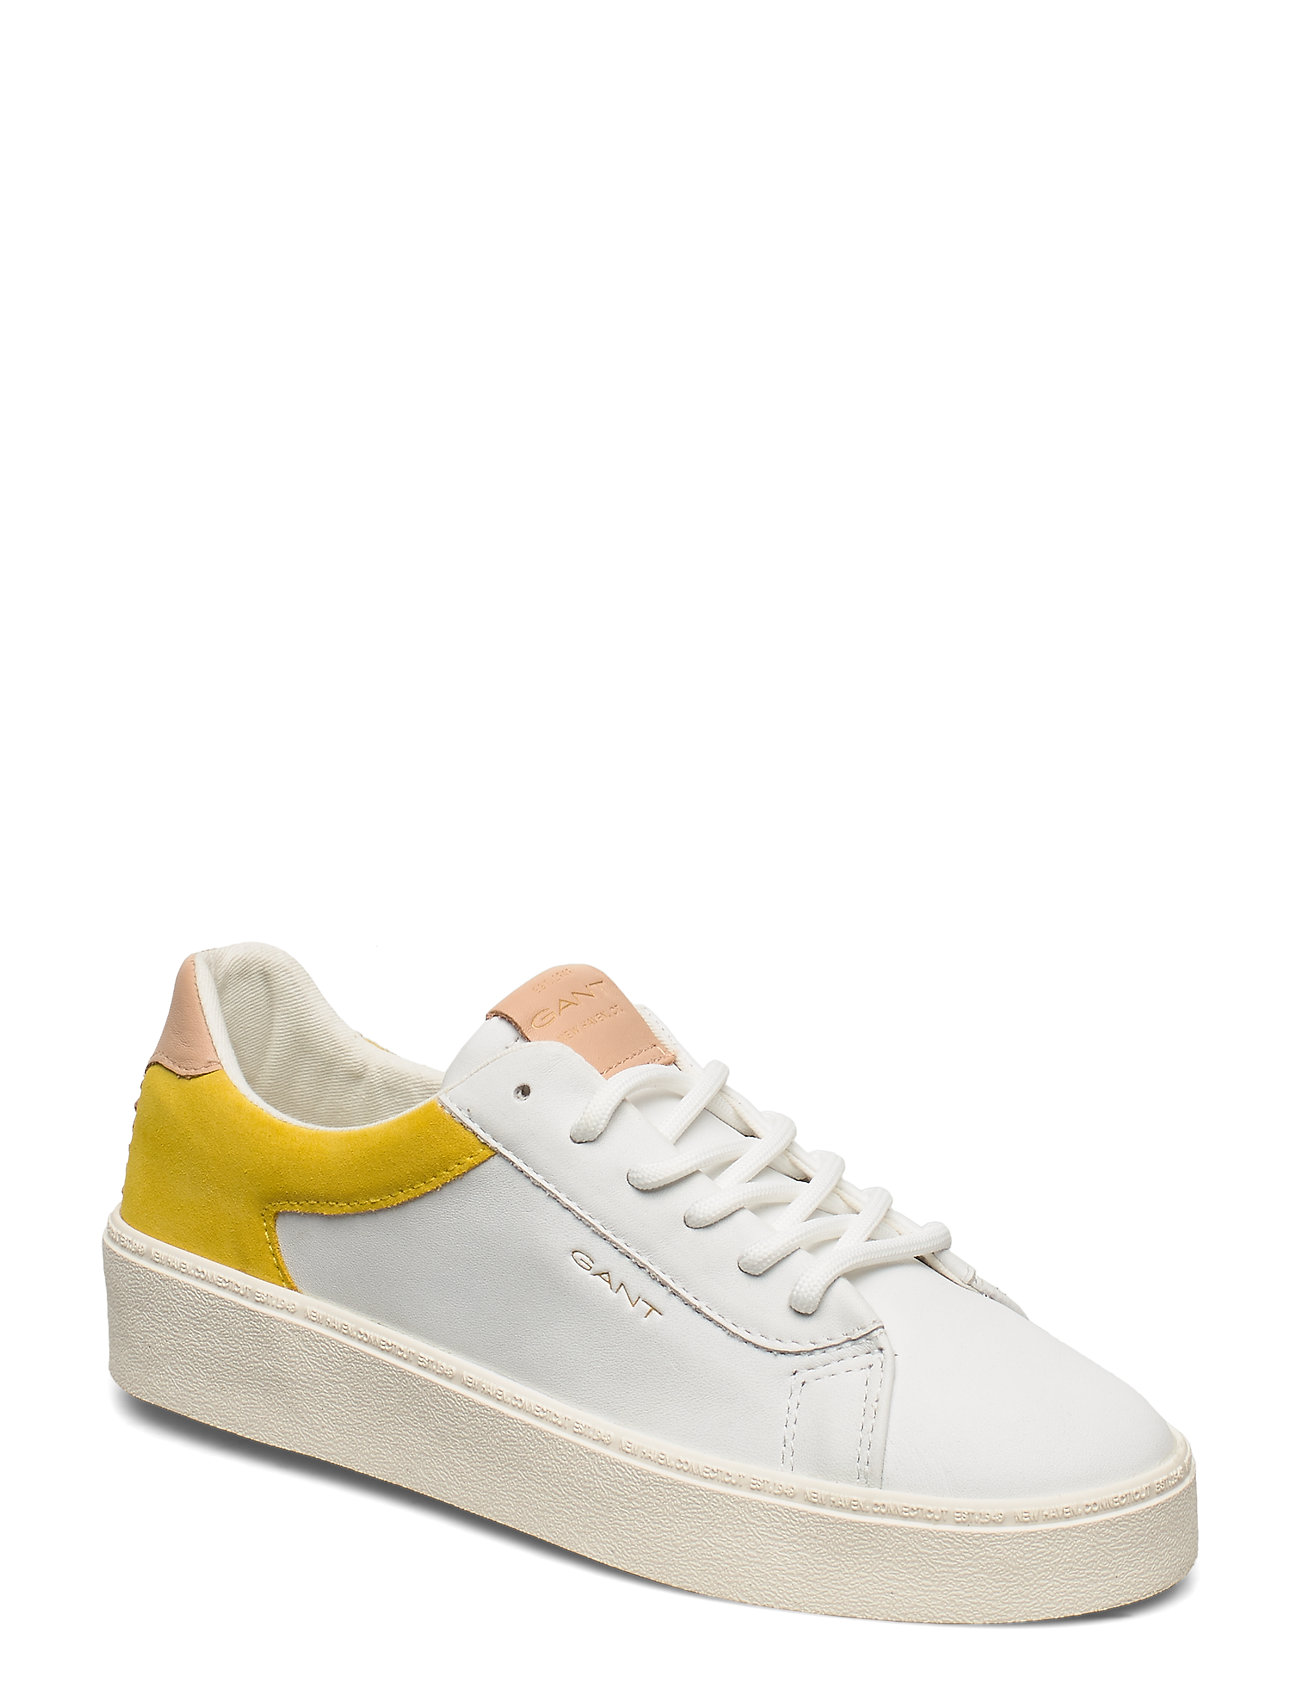 sneakers – Lagalilly Low-top Sneakers Hvid GANT dame i BR. YELLOW - Pashion.dk